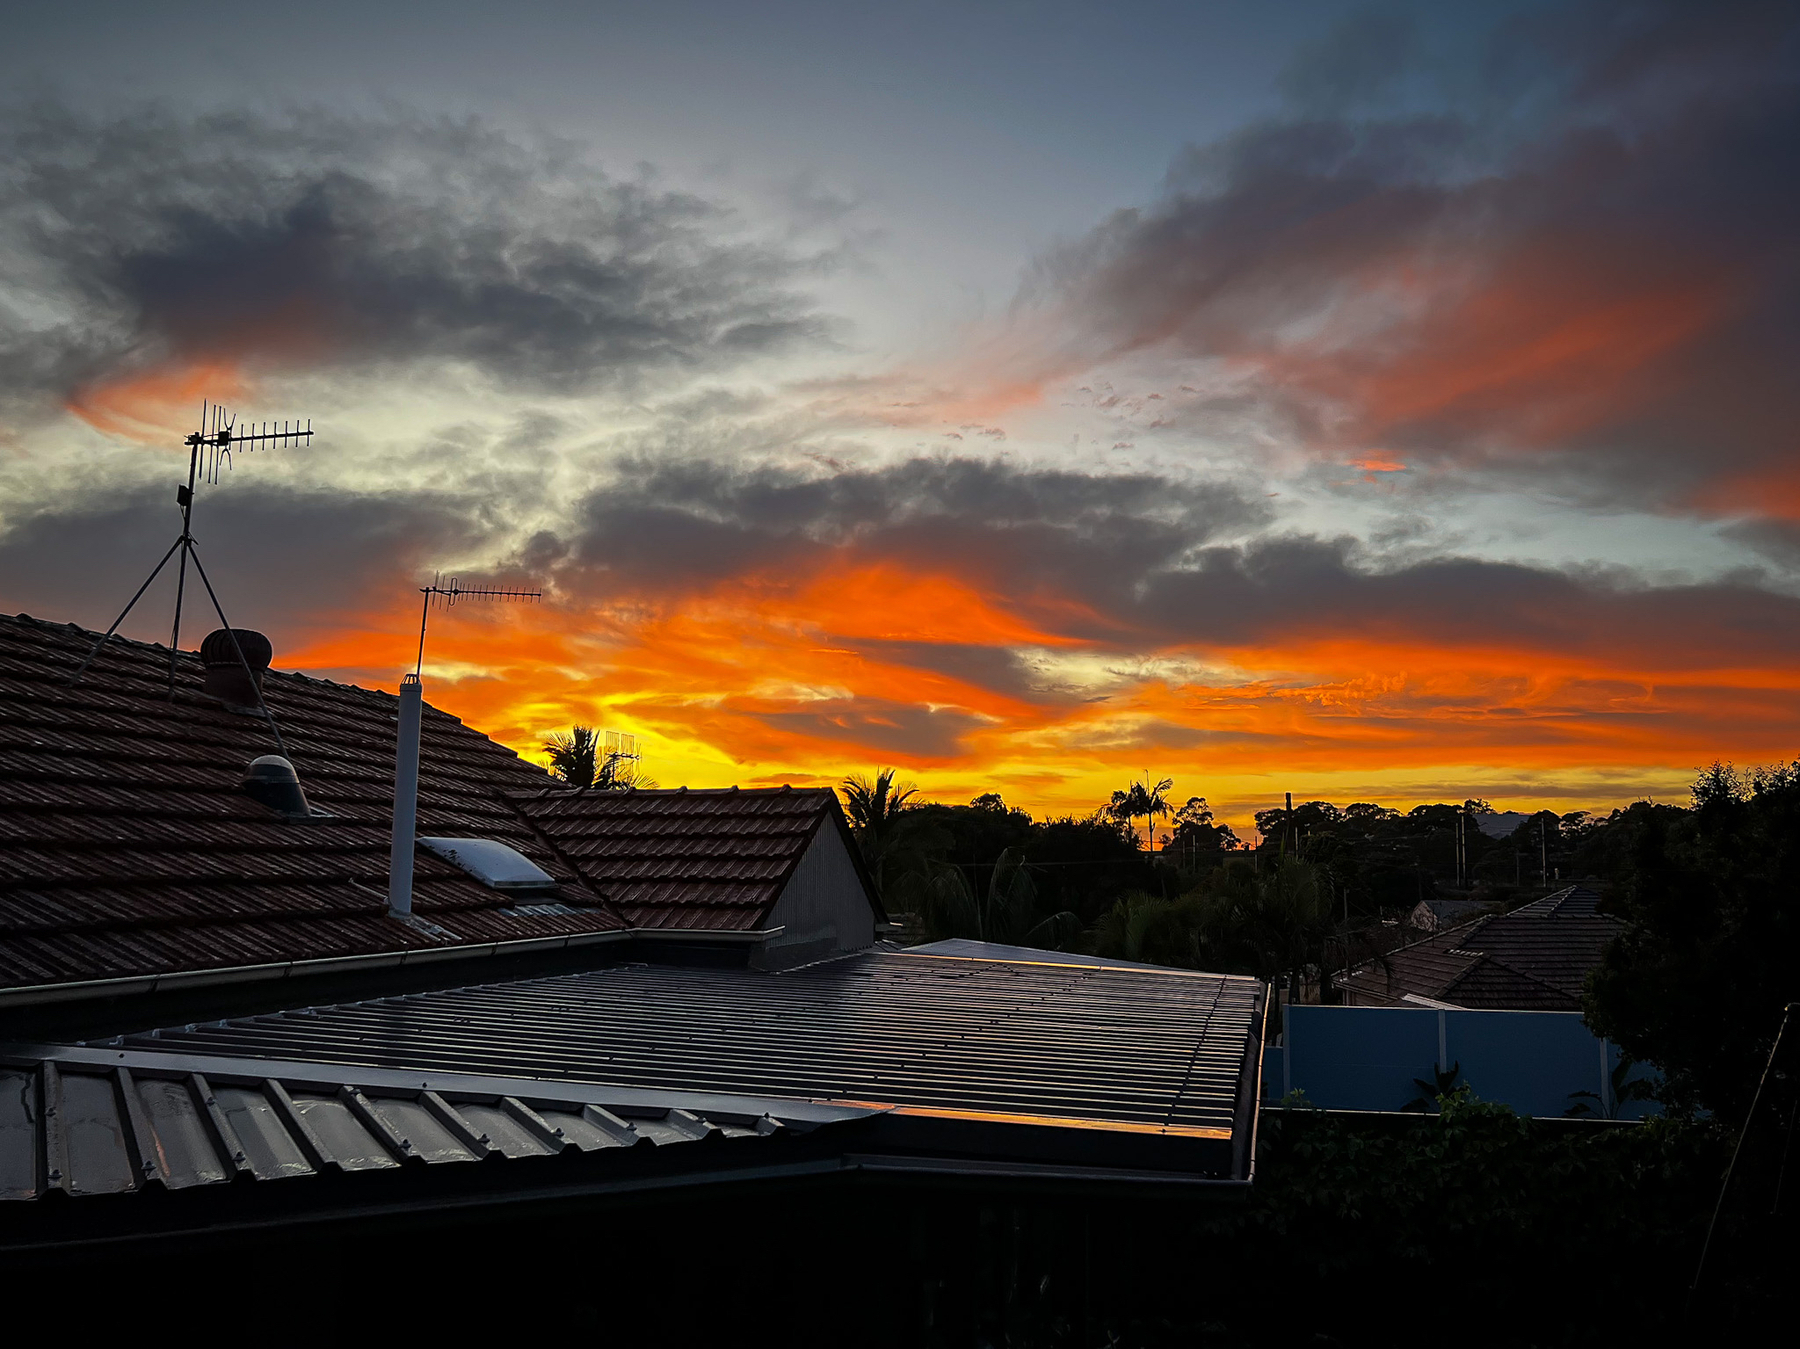 The sun rising and cutting golden light through the clouds over suburban rooftops.